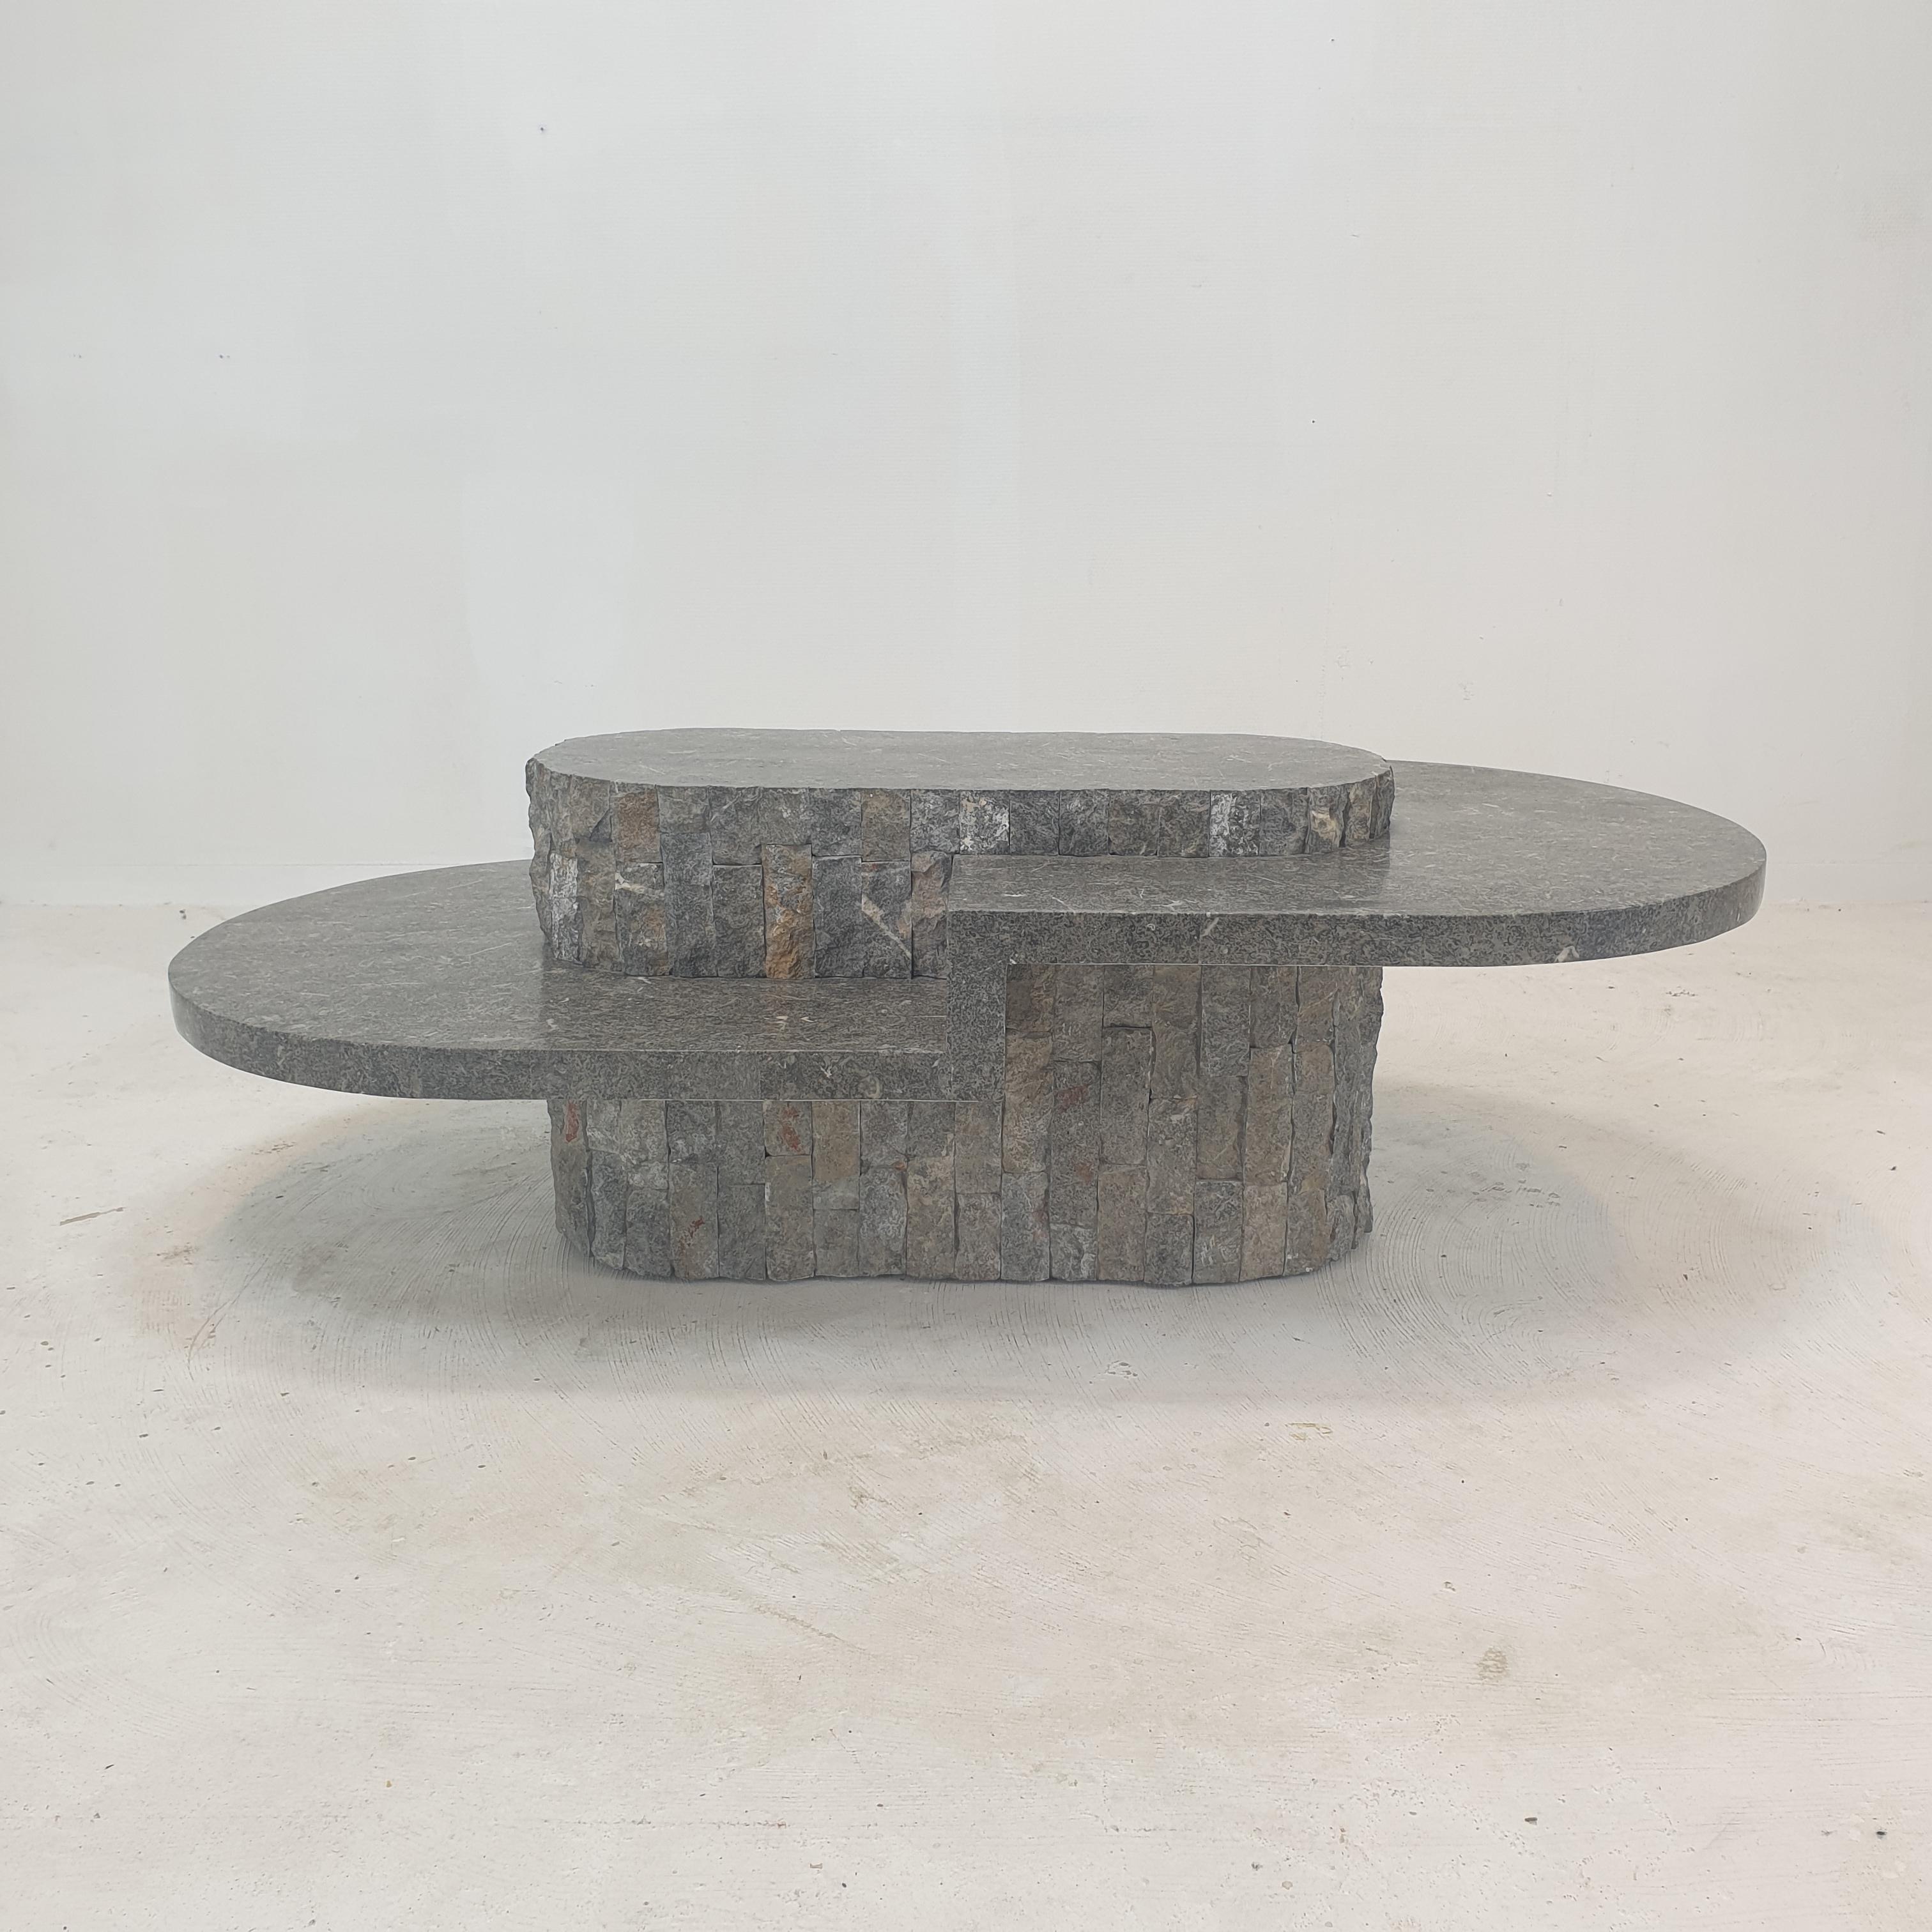 Rare and very nice oval coffee or side table by Magnussen Ponte, 1980's.

This stunning table is made of rough edged brick motif Mactan stone or Fossil Stone.

This is a unique piece!

We work with professional packers and shippers, we can